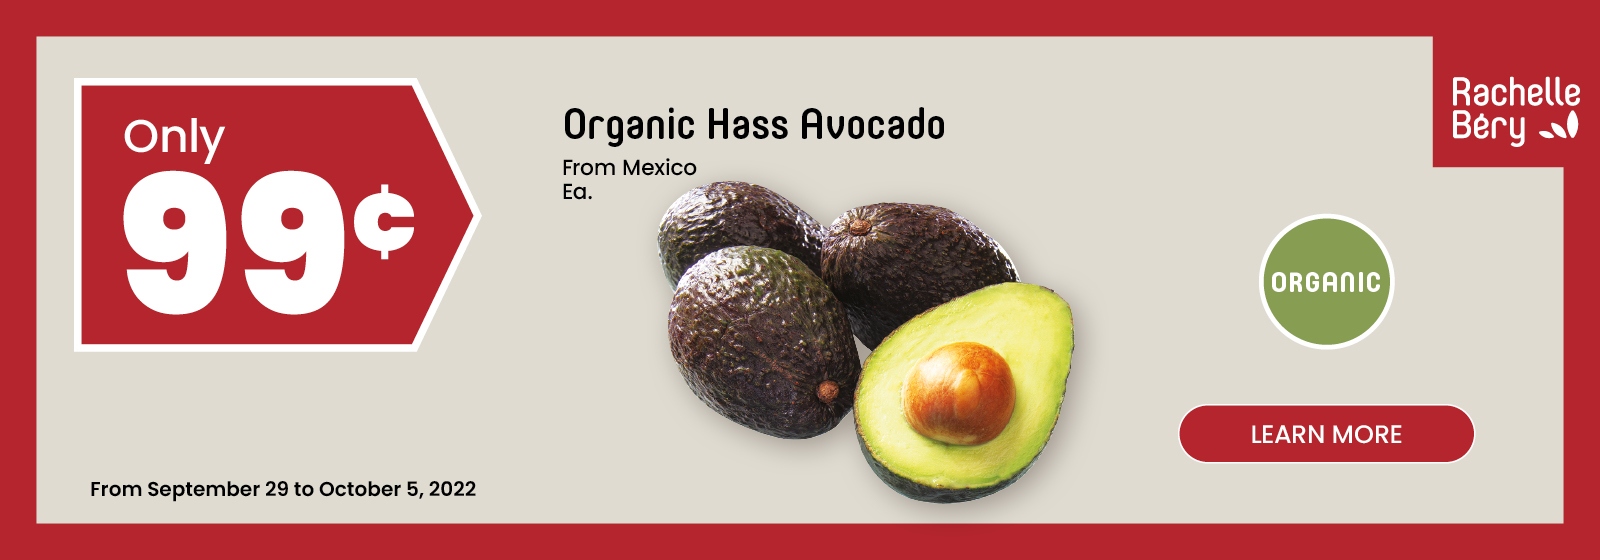 Text Reading 'Buy Organic Hass Avocado from Mexico each for only 99¢ from September 29 to October 5, 2022 at Rachelle Bery. To 'Learn More', click on the button given below.'